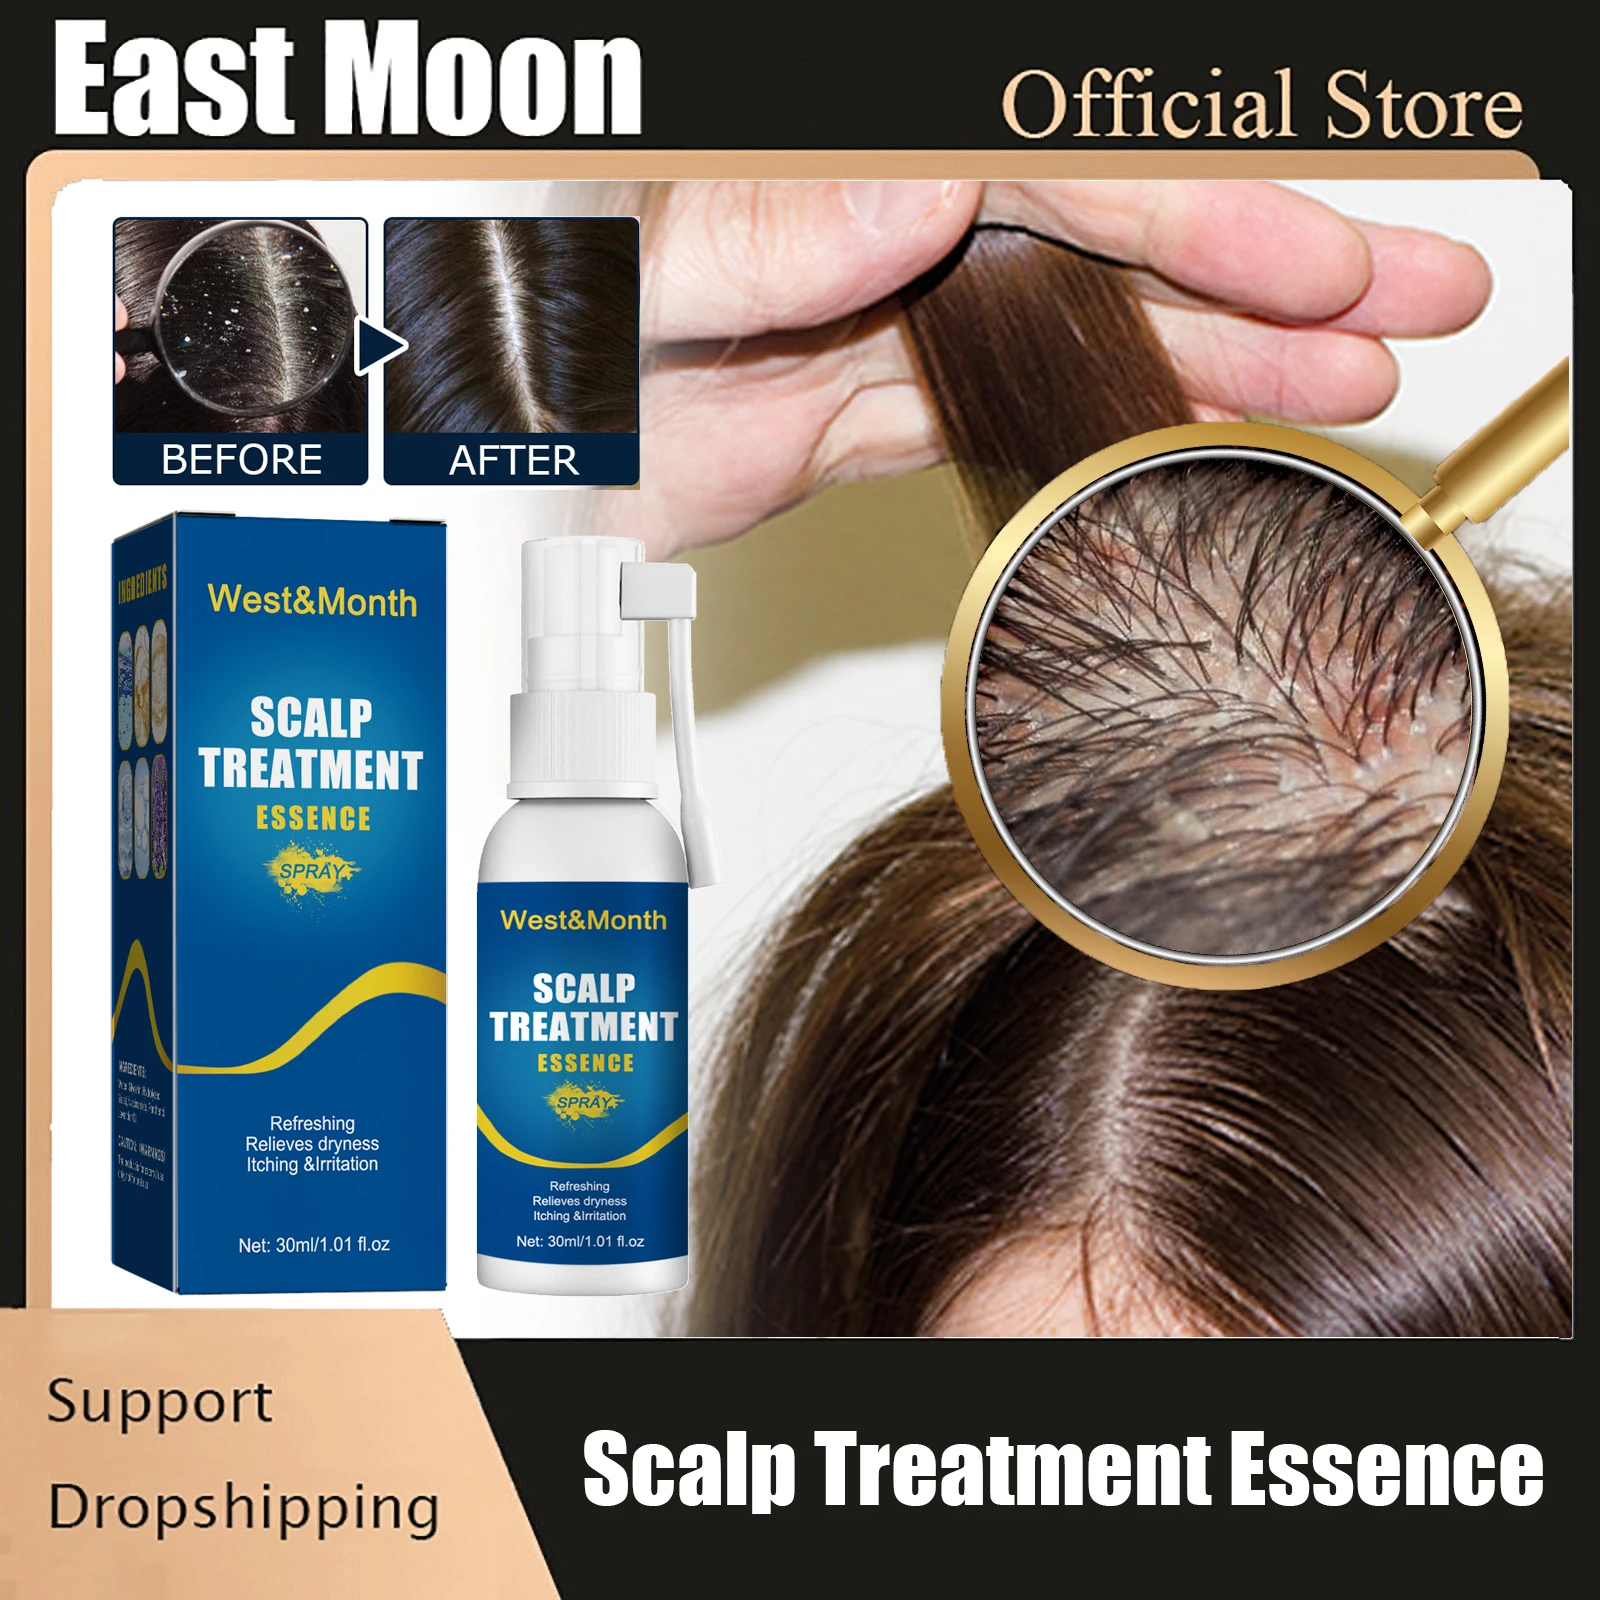 

Scalp Treatment Essence Spray Cleansing Nourishing Anti Dandruff Itching Repair Prevent Hair Loss Smooth Hair Care for Men Women